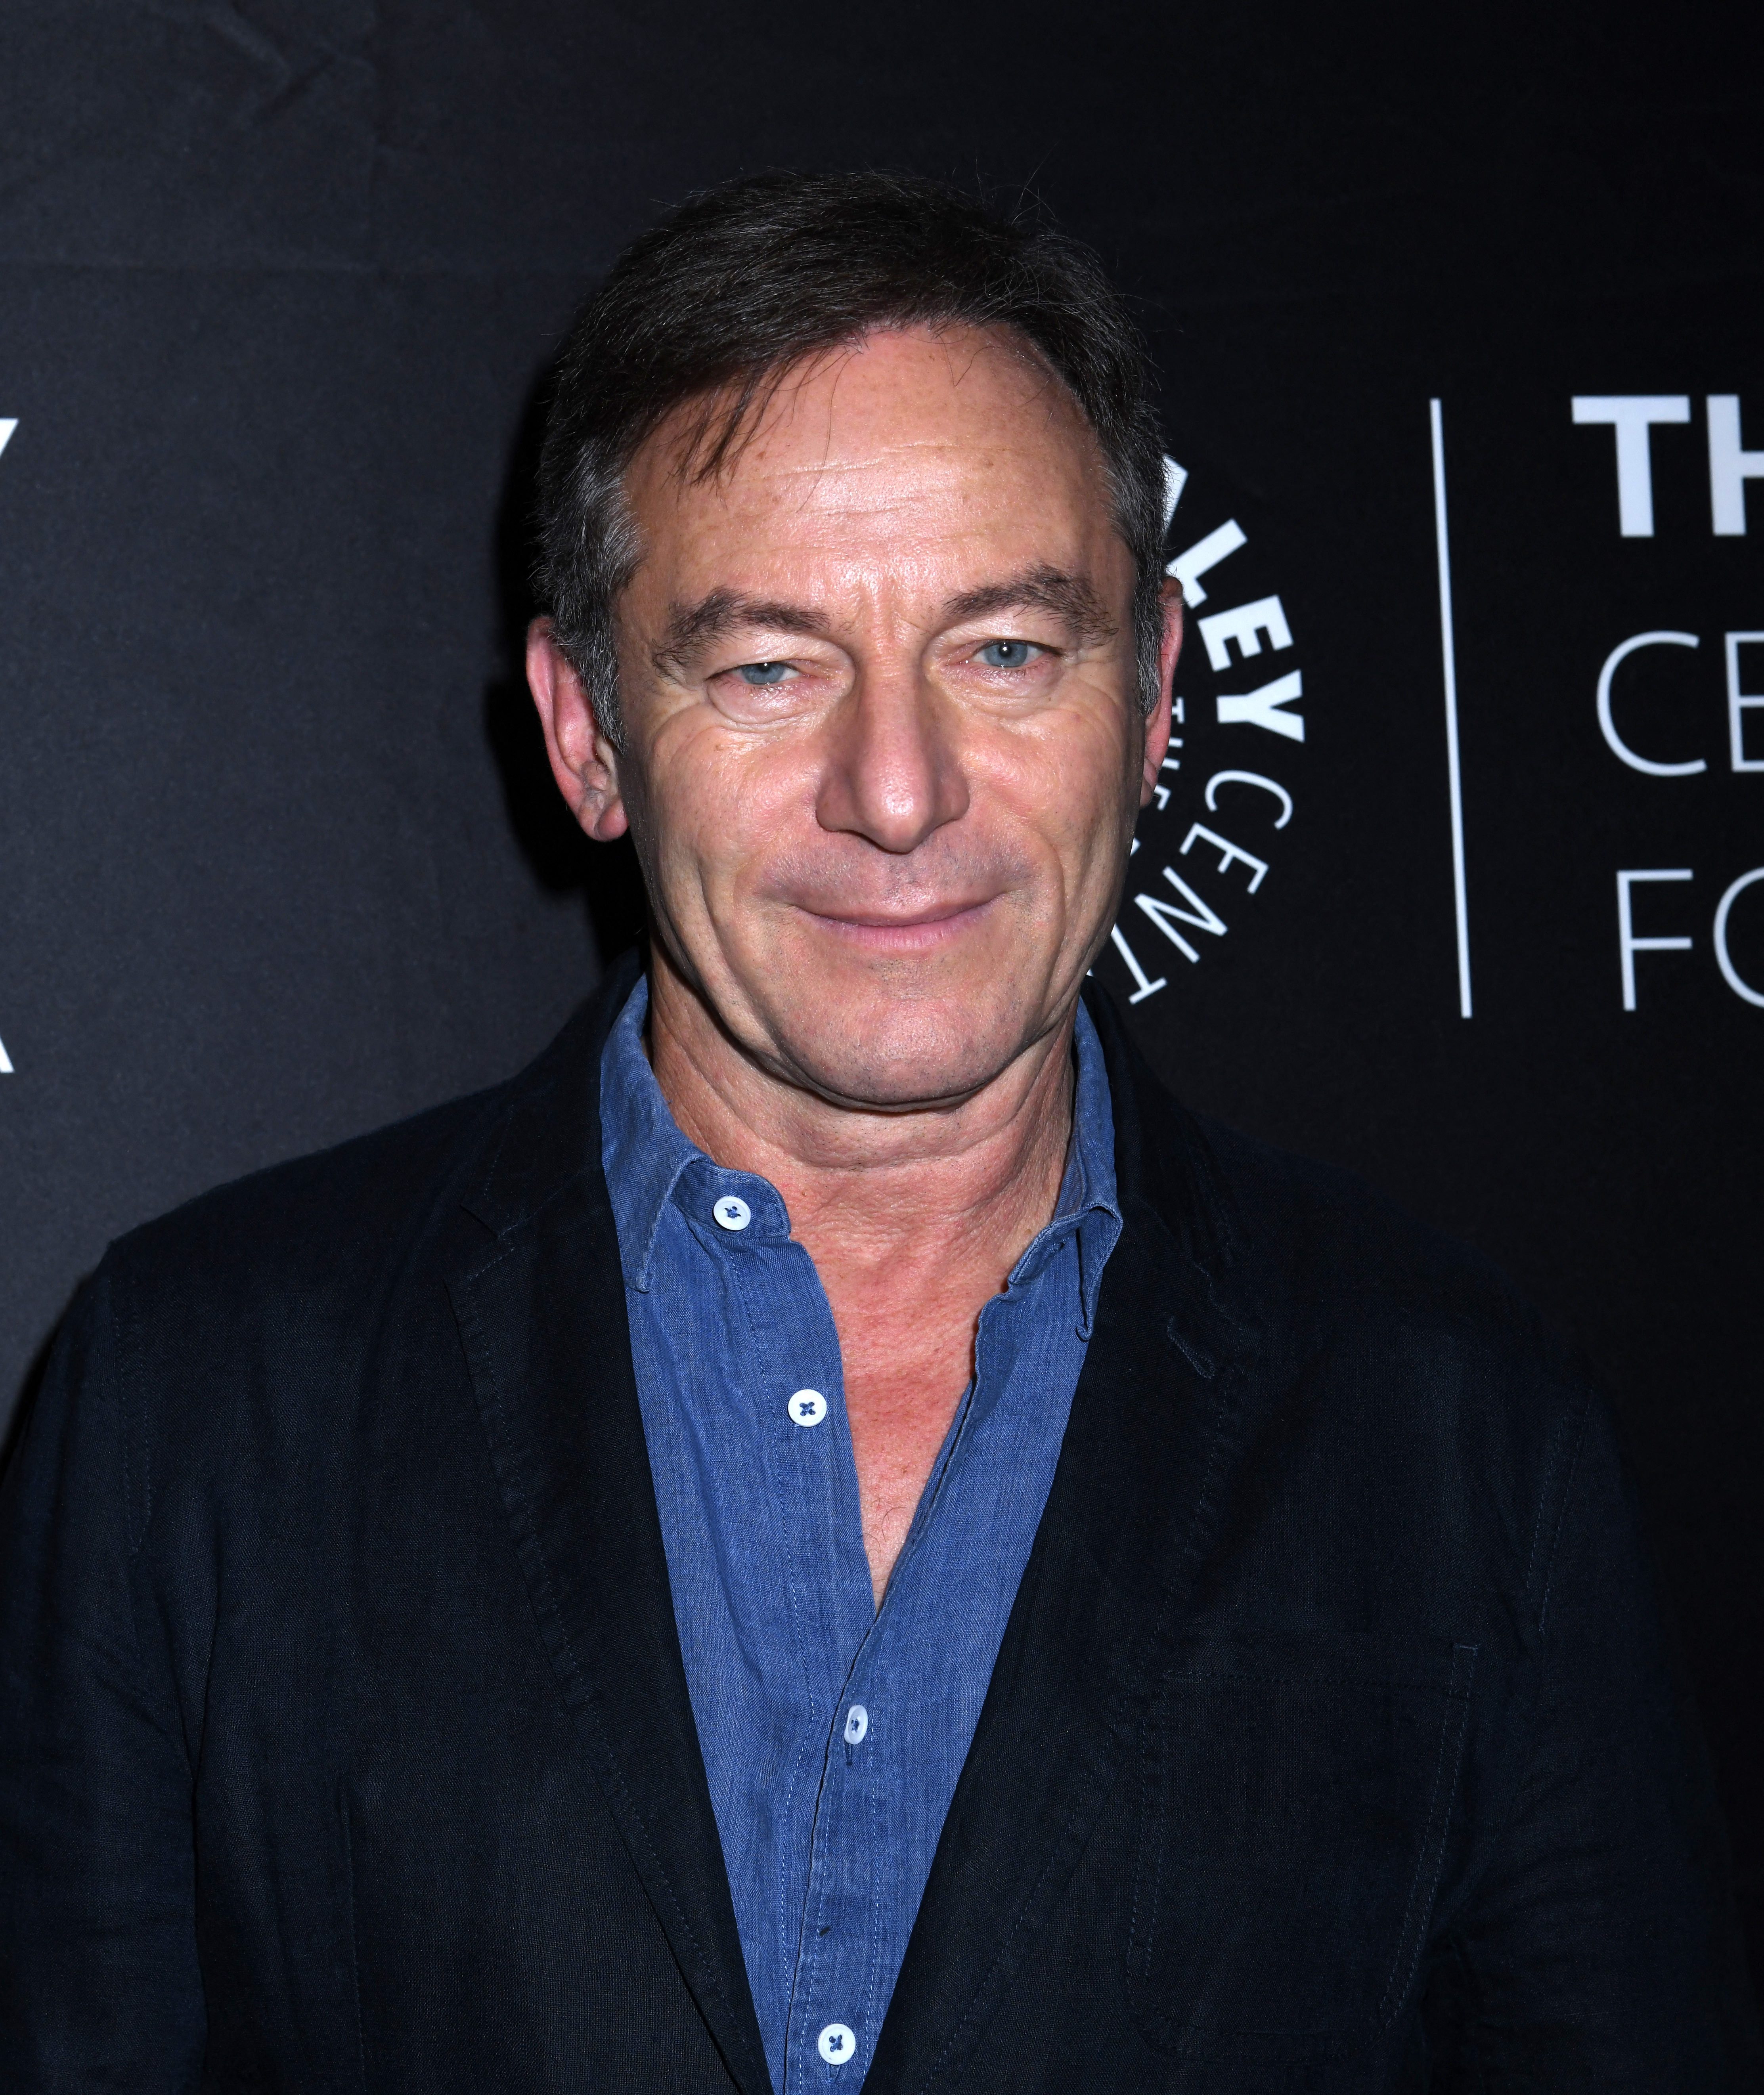 Jason Isaacs of Harry Potter fame will also be in Season 3 of The White Lotus